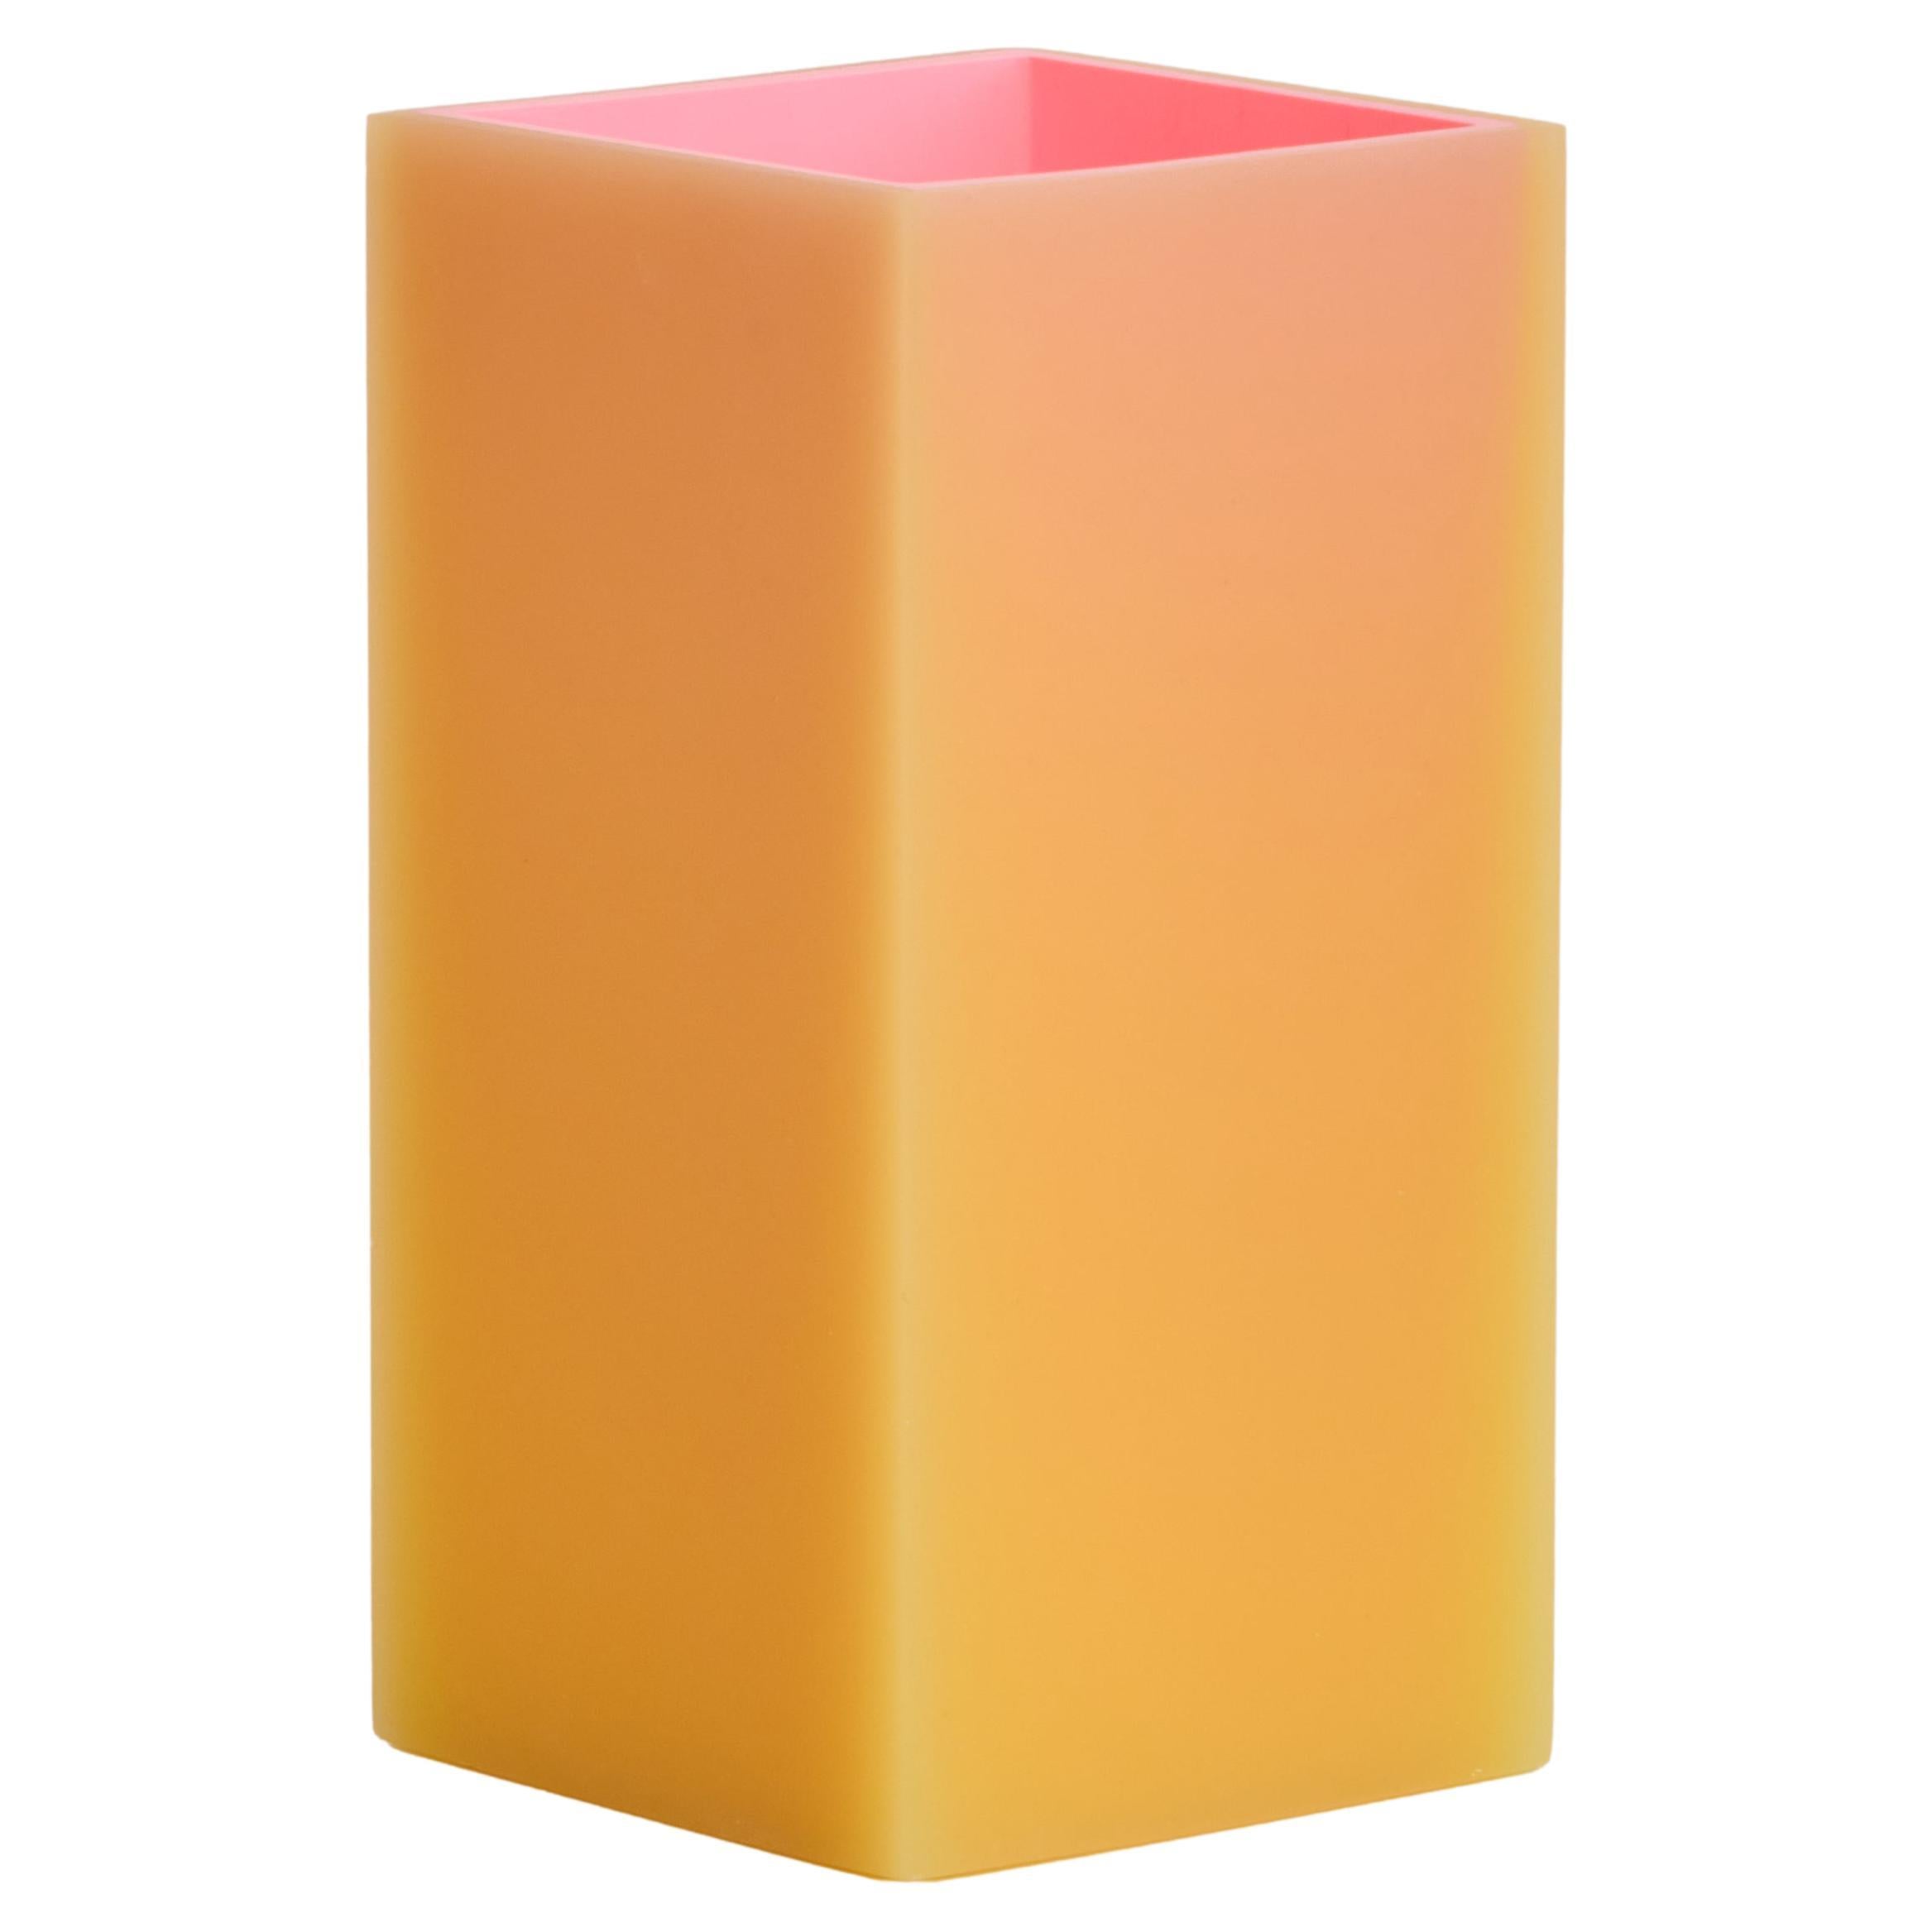 MELD Square Resin Vase/Decor in Orange by Facture, REP by Tuleste Factory For Sale